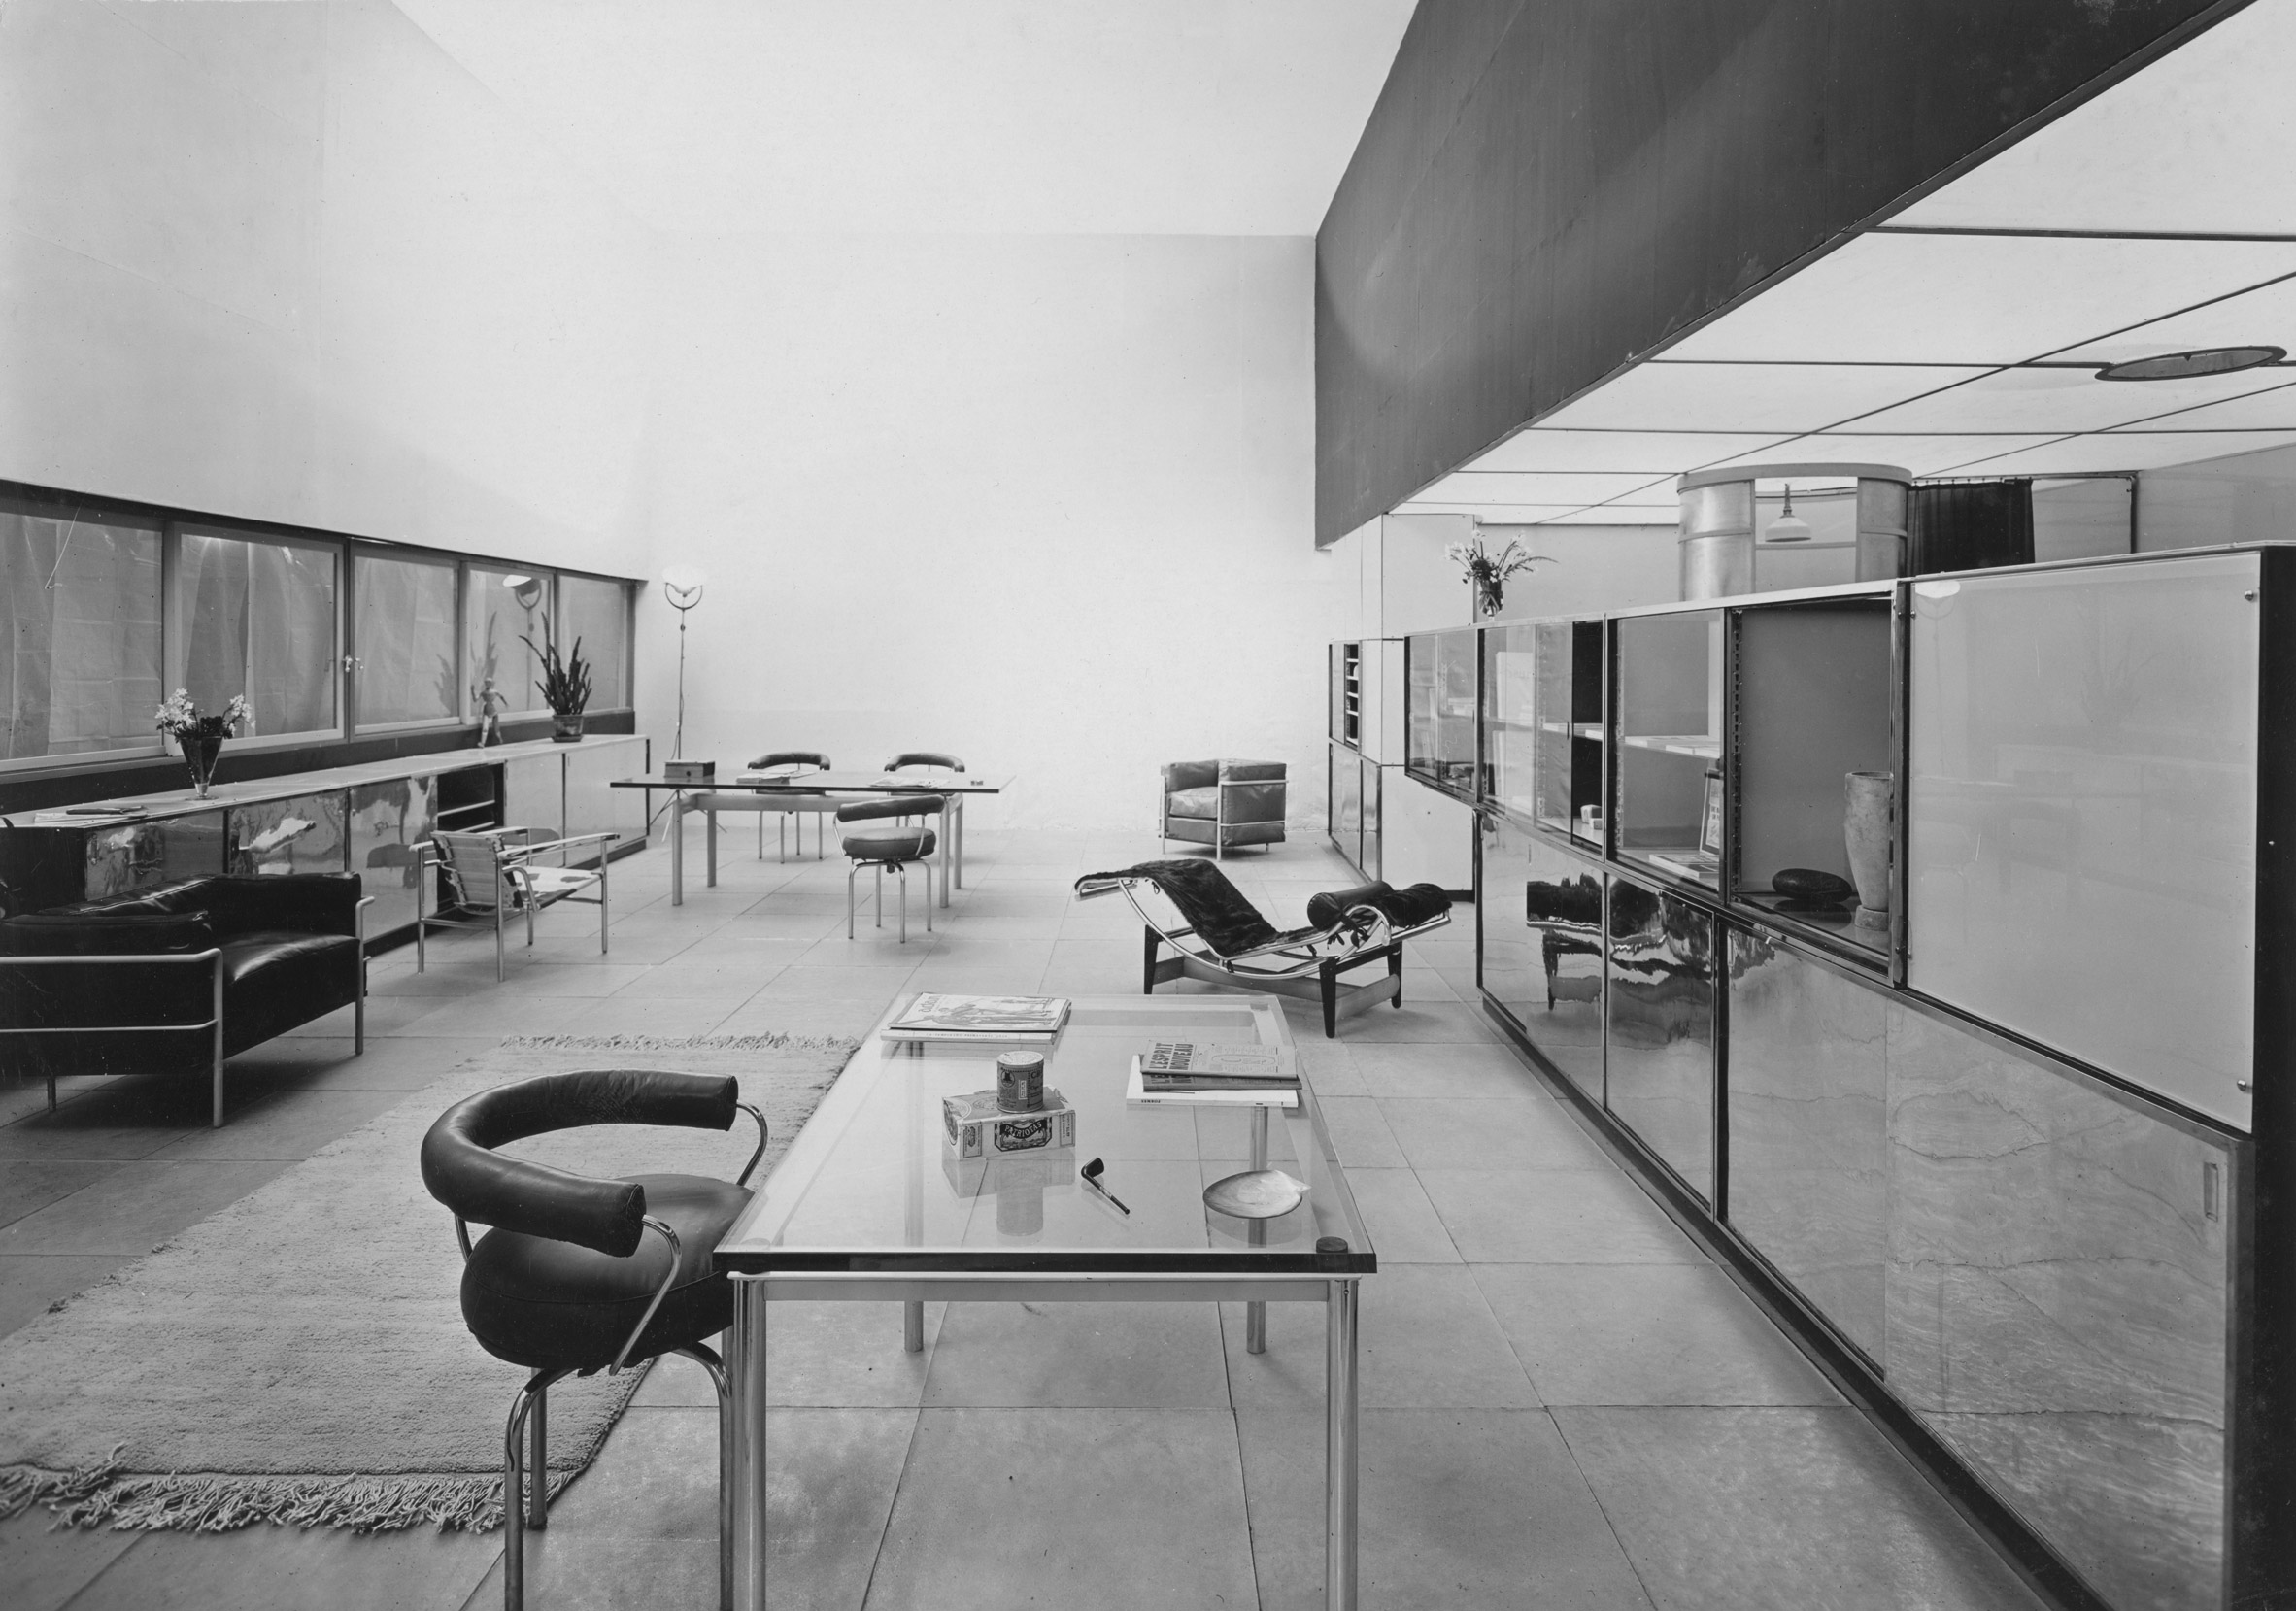 Charlotte Perriand: Inventing a New World - Exhibitions - The Design Edit